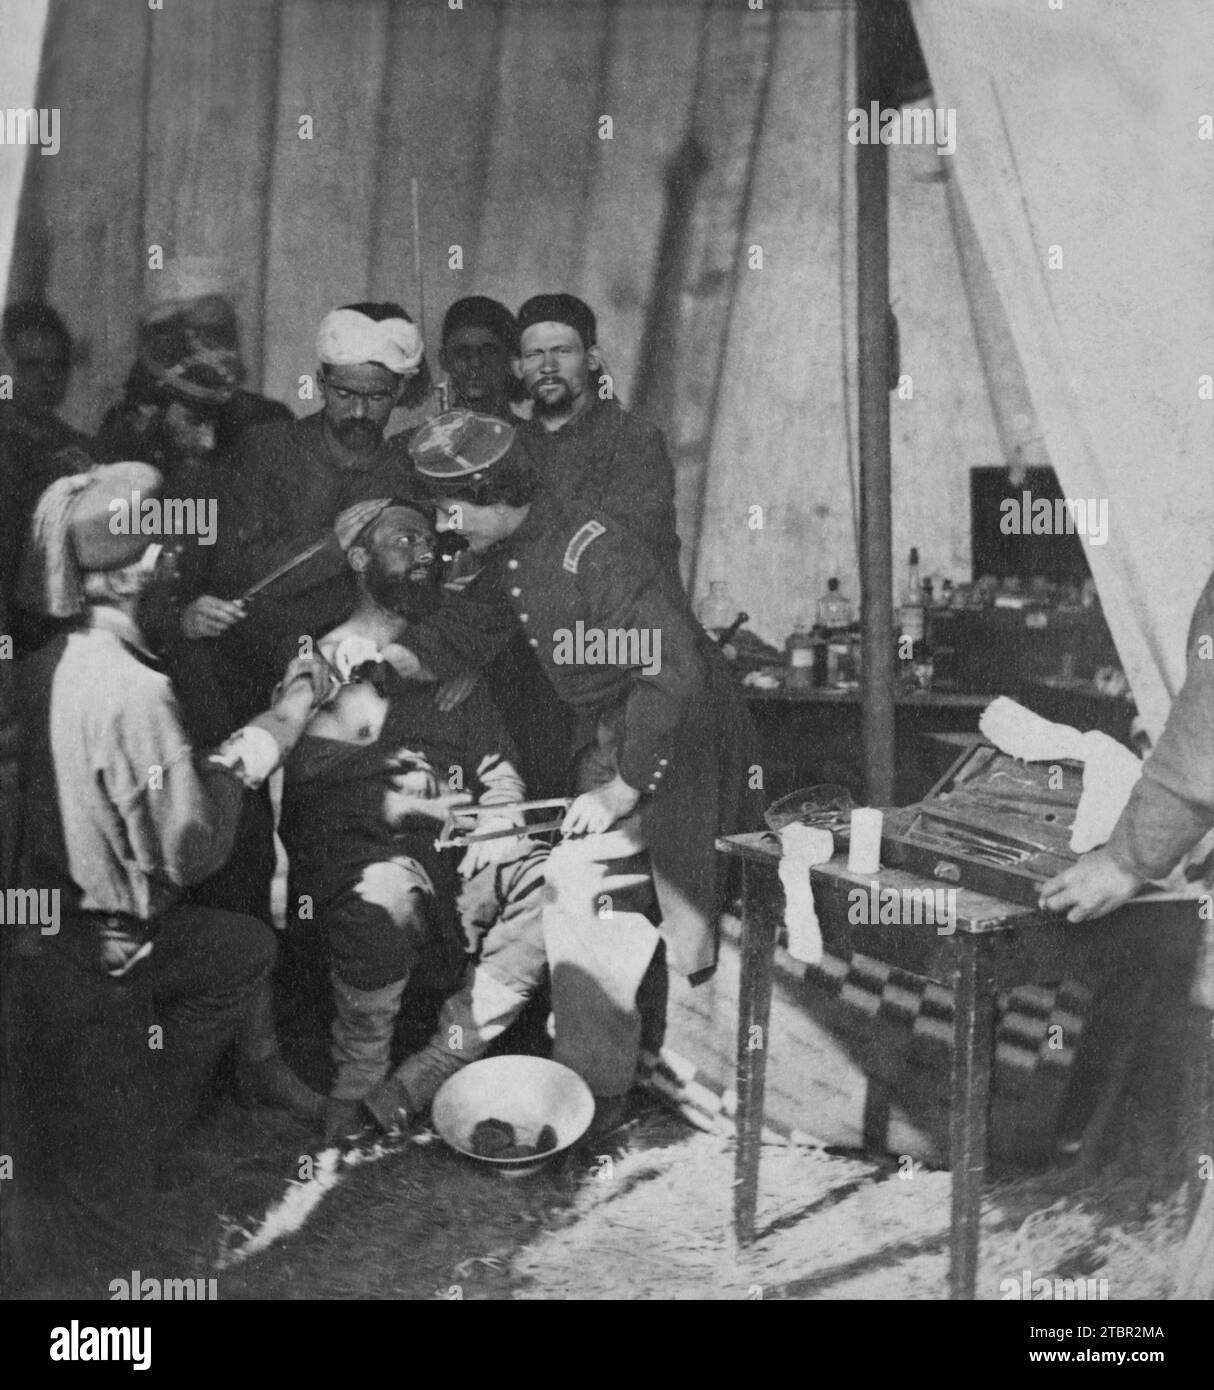 1861: Hospital scene at Fortress Monroe, Virginia. Stereograph shows Zouave soldiers, possibly from the 5th New York Infantry Regiment, in a field hos Stock Photo